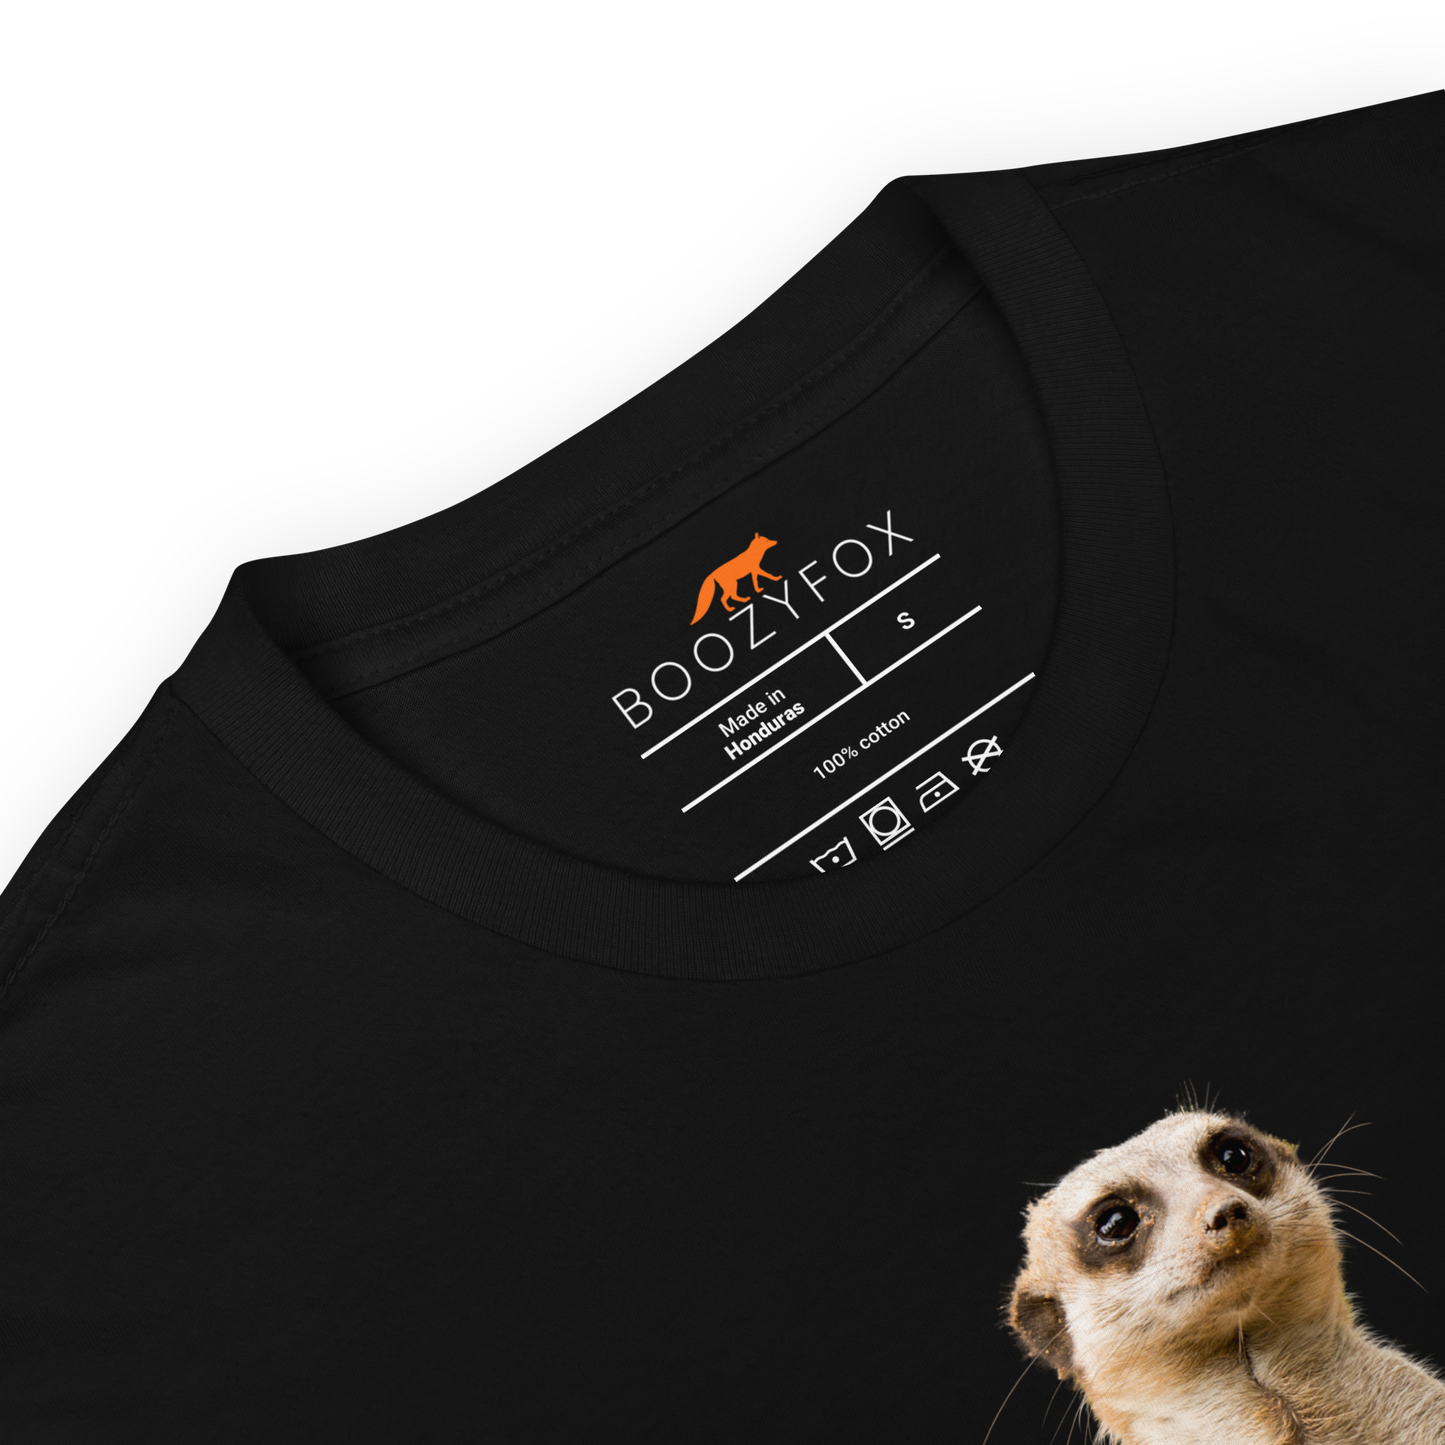 Product Details of a Black Meerkat T-Shirt featuring a hilarious Beerkat graphic on the chest - Funny Graphic Meerkat T-Shirts - Boozy Fox